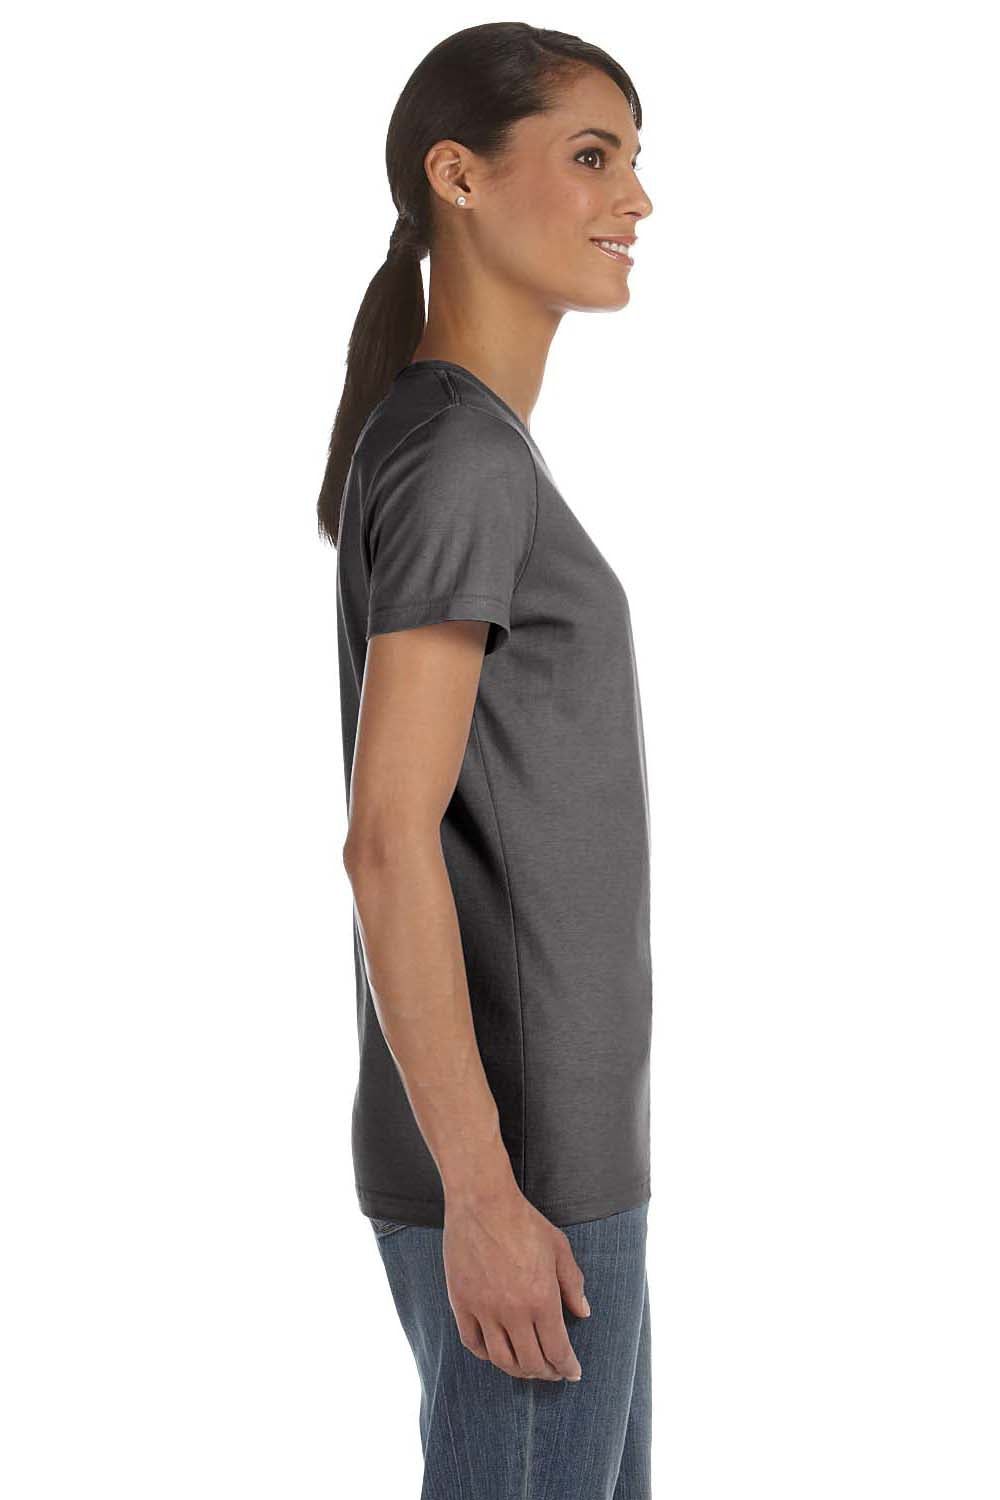 Fruit Of The Loom L3930R Womens HD Jersey Short Sleeve Crewneck T-Shirt Charcoal Grey Side